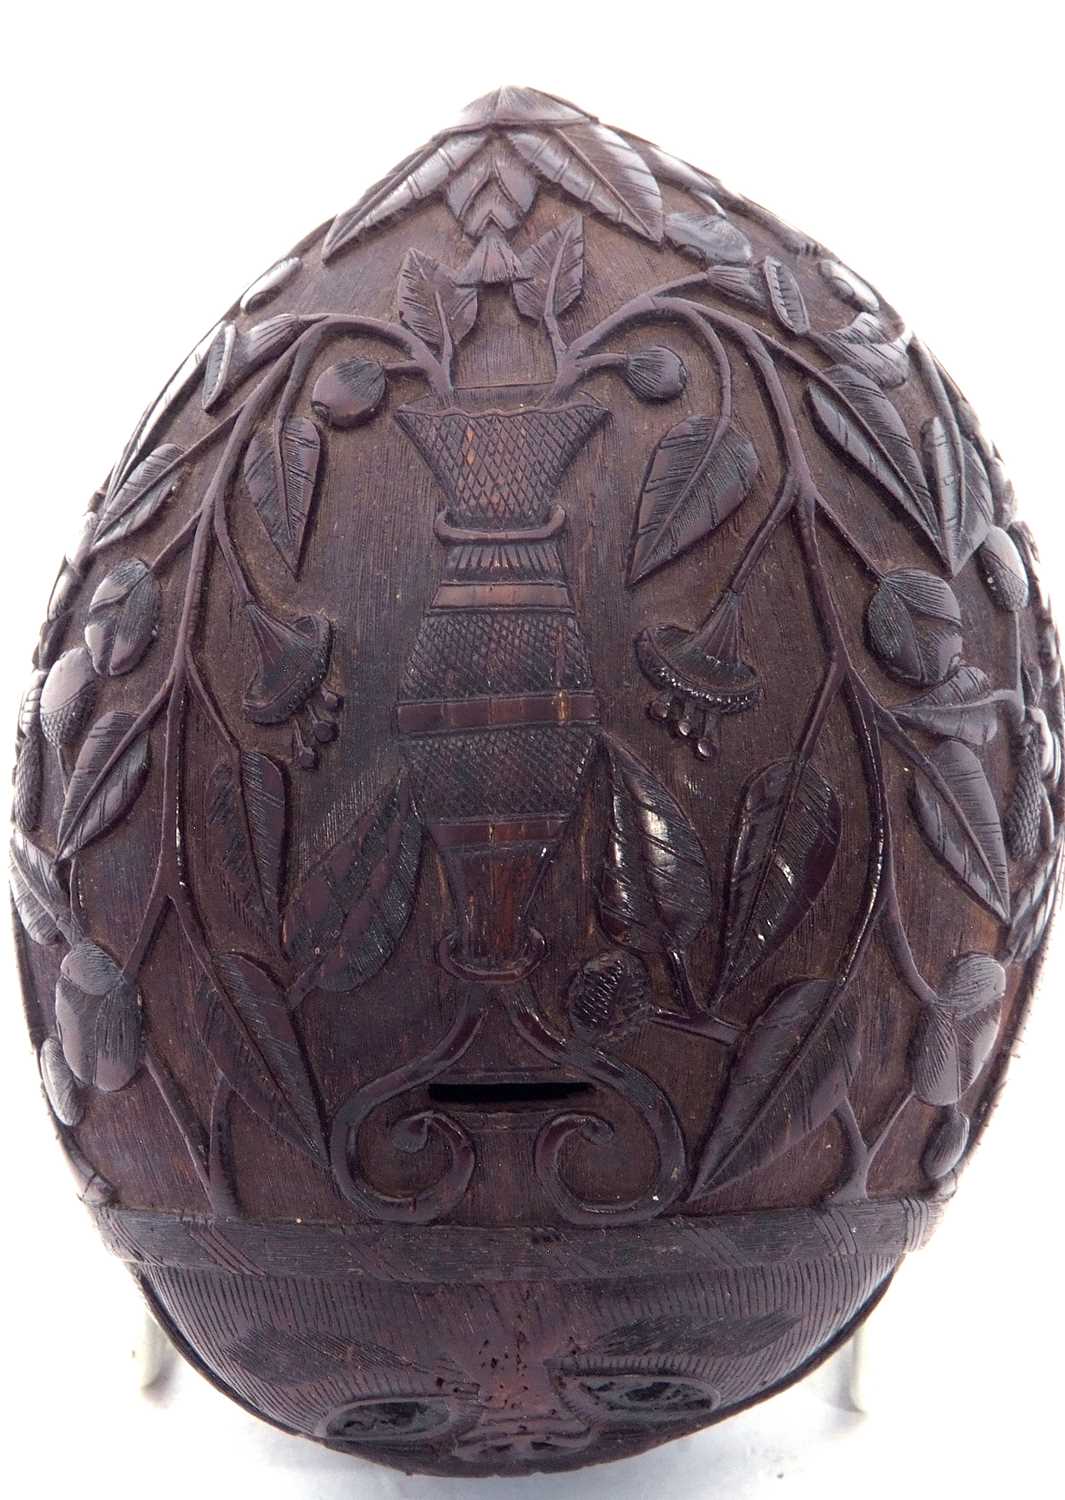 An unusual antique carved coconut bugbear container, the exterior decorated with a scene of - Image 5 of 5